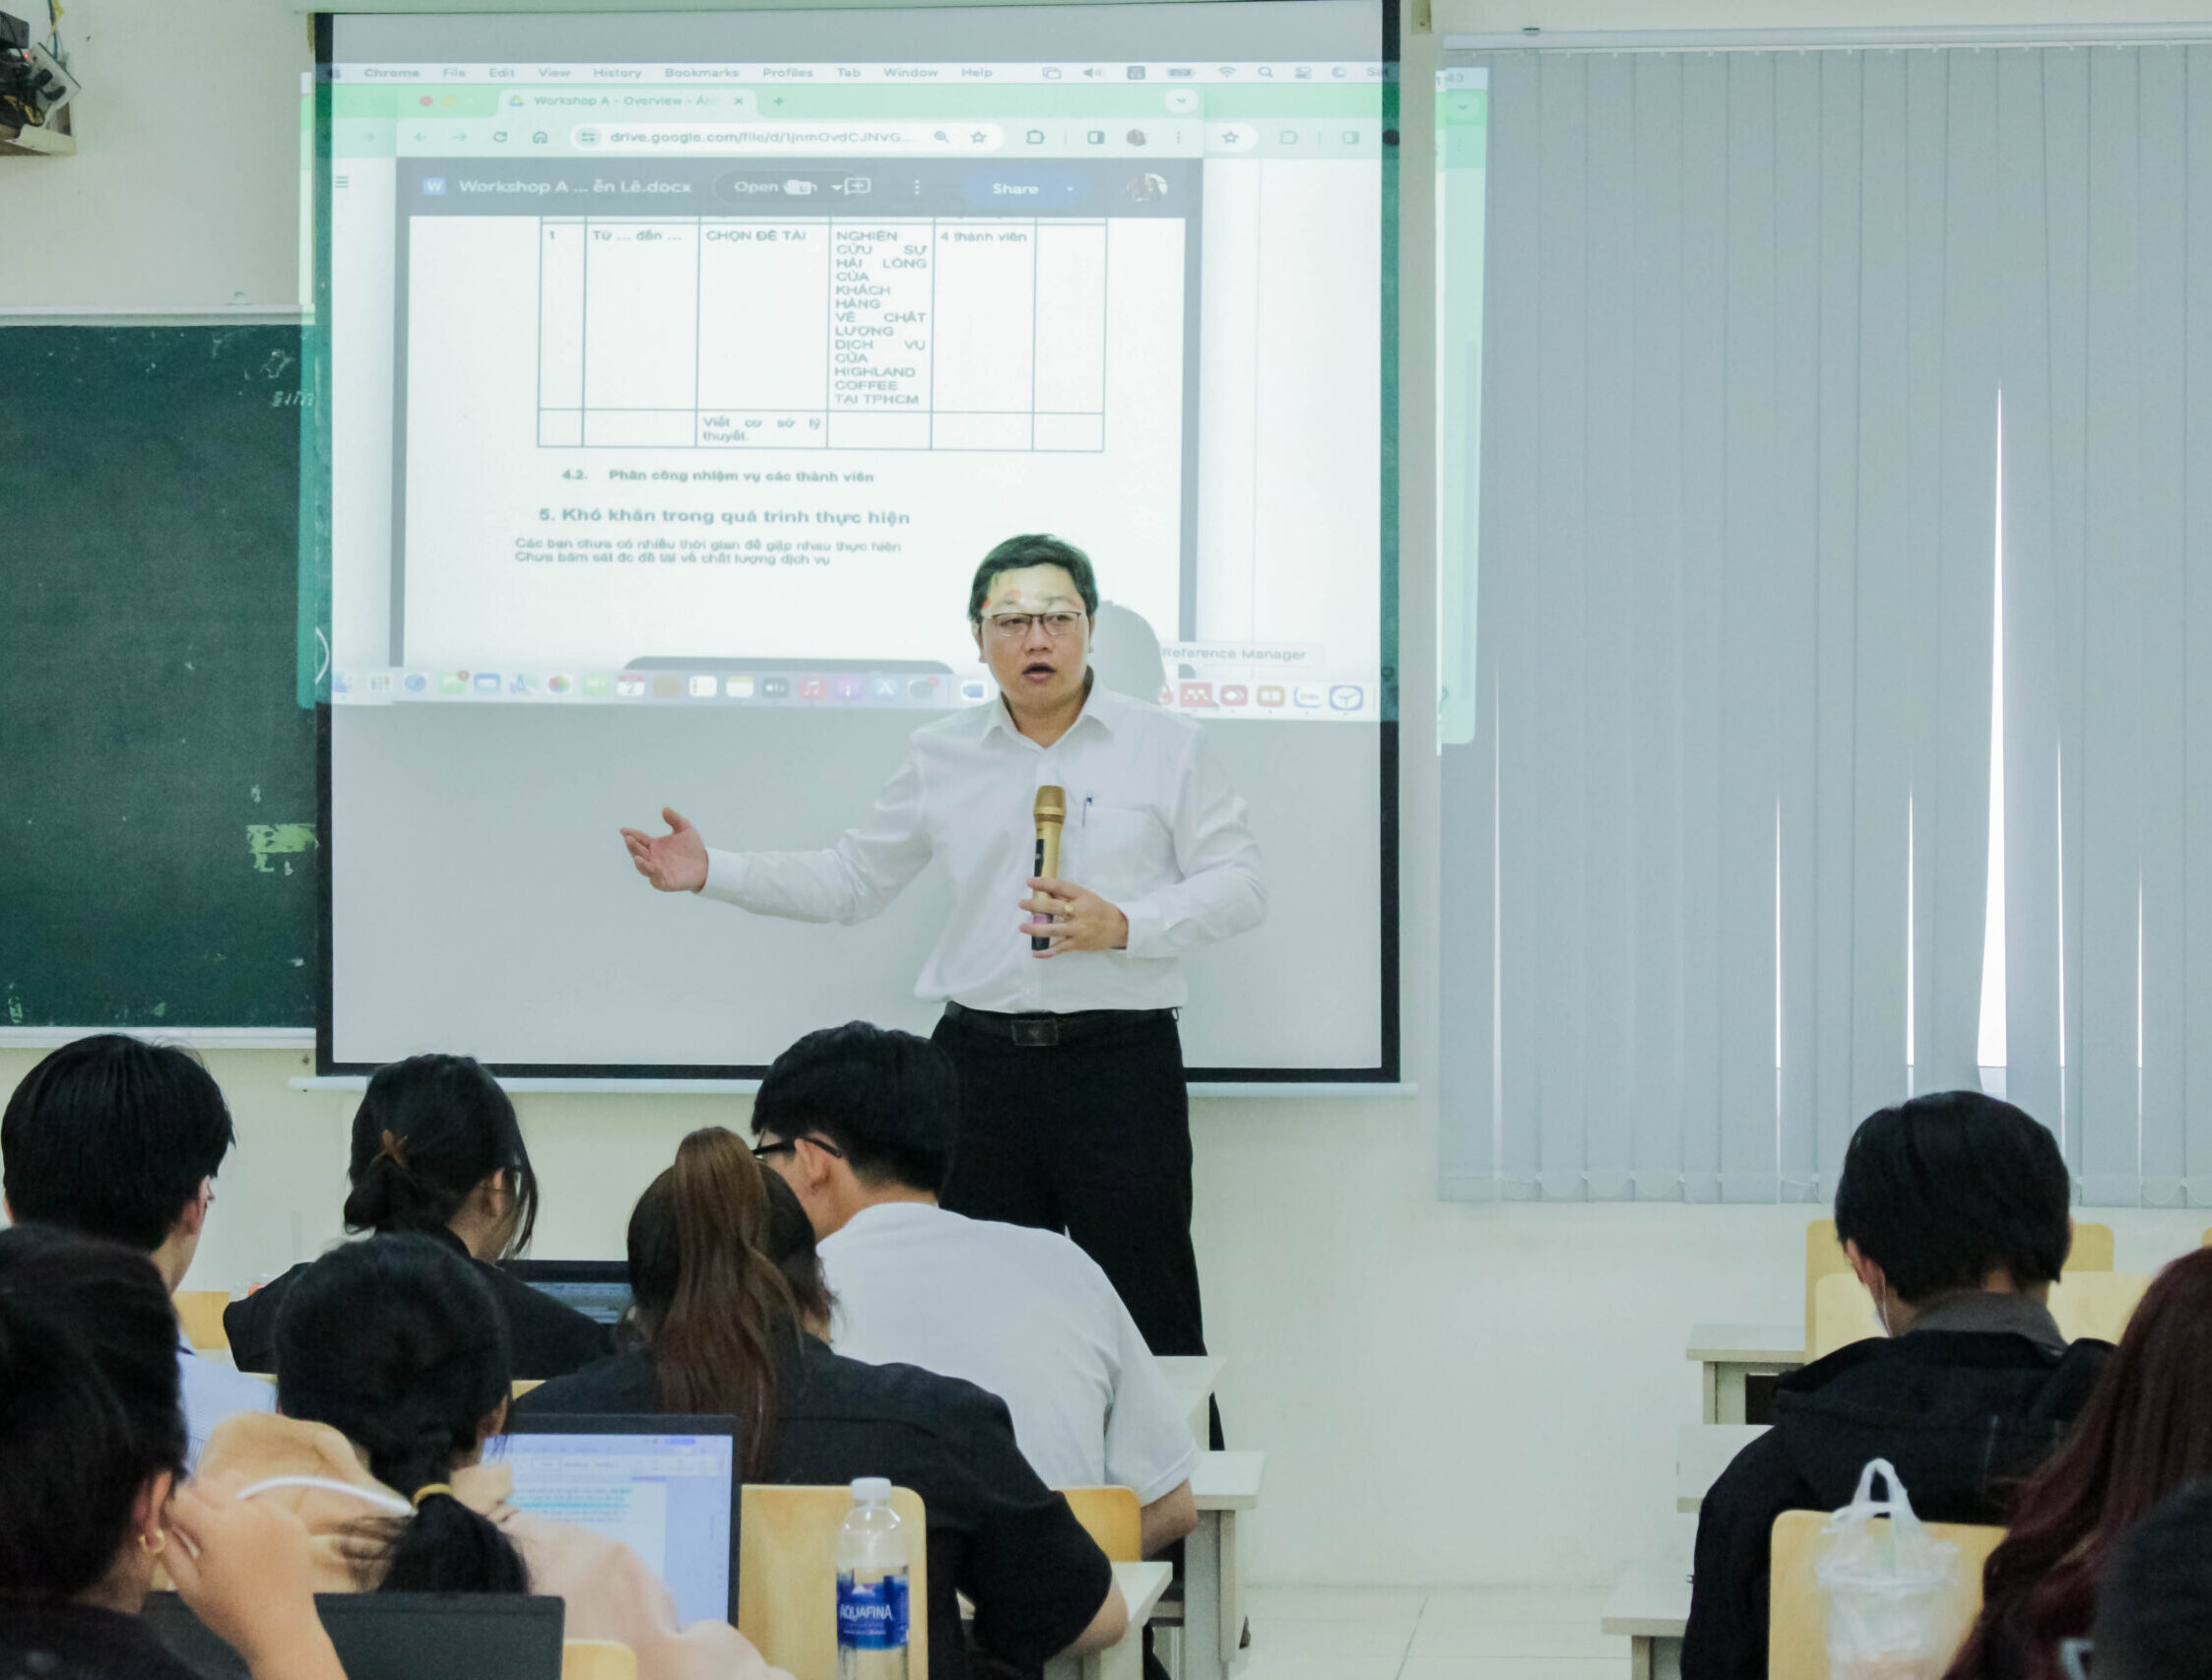 Mr.Vu Nhat Phuong, MBA, is a lecturer with many years of experience in teaching and supporting students.